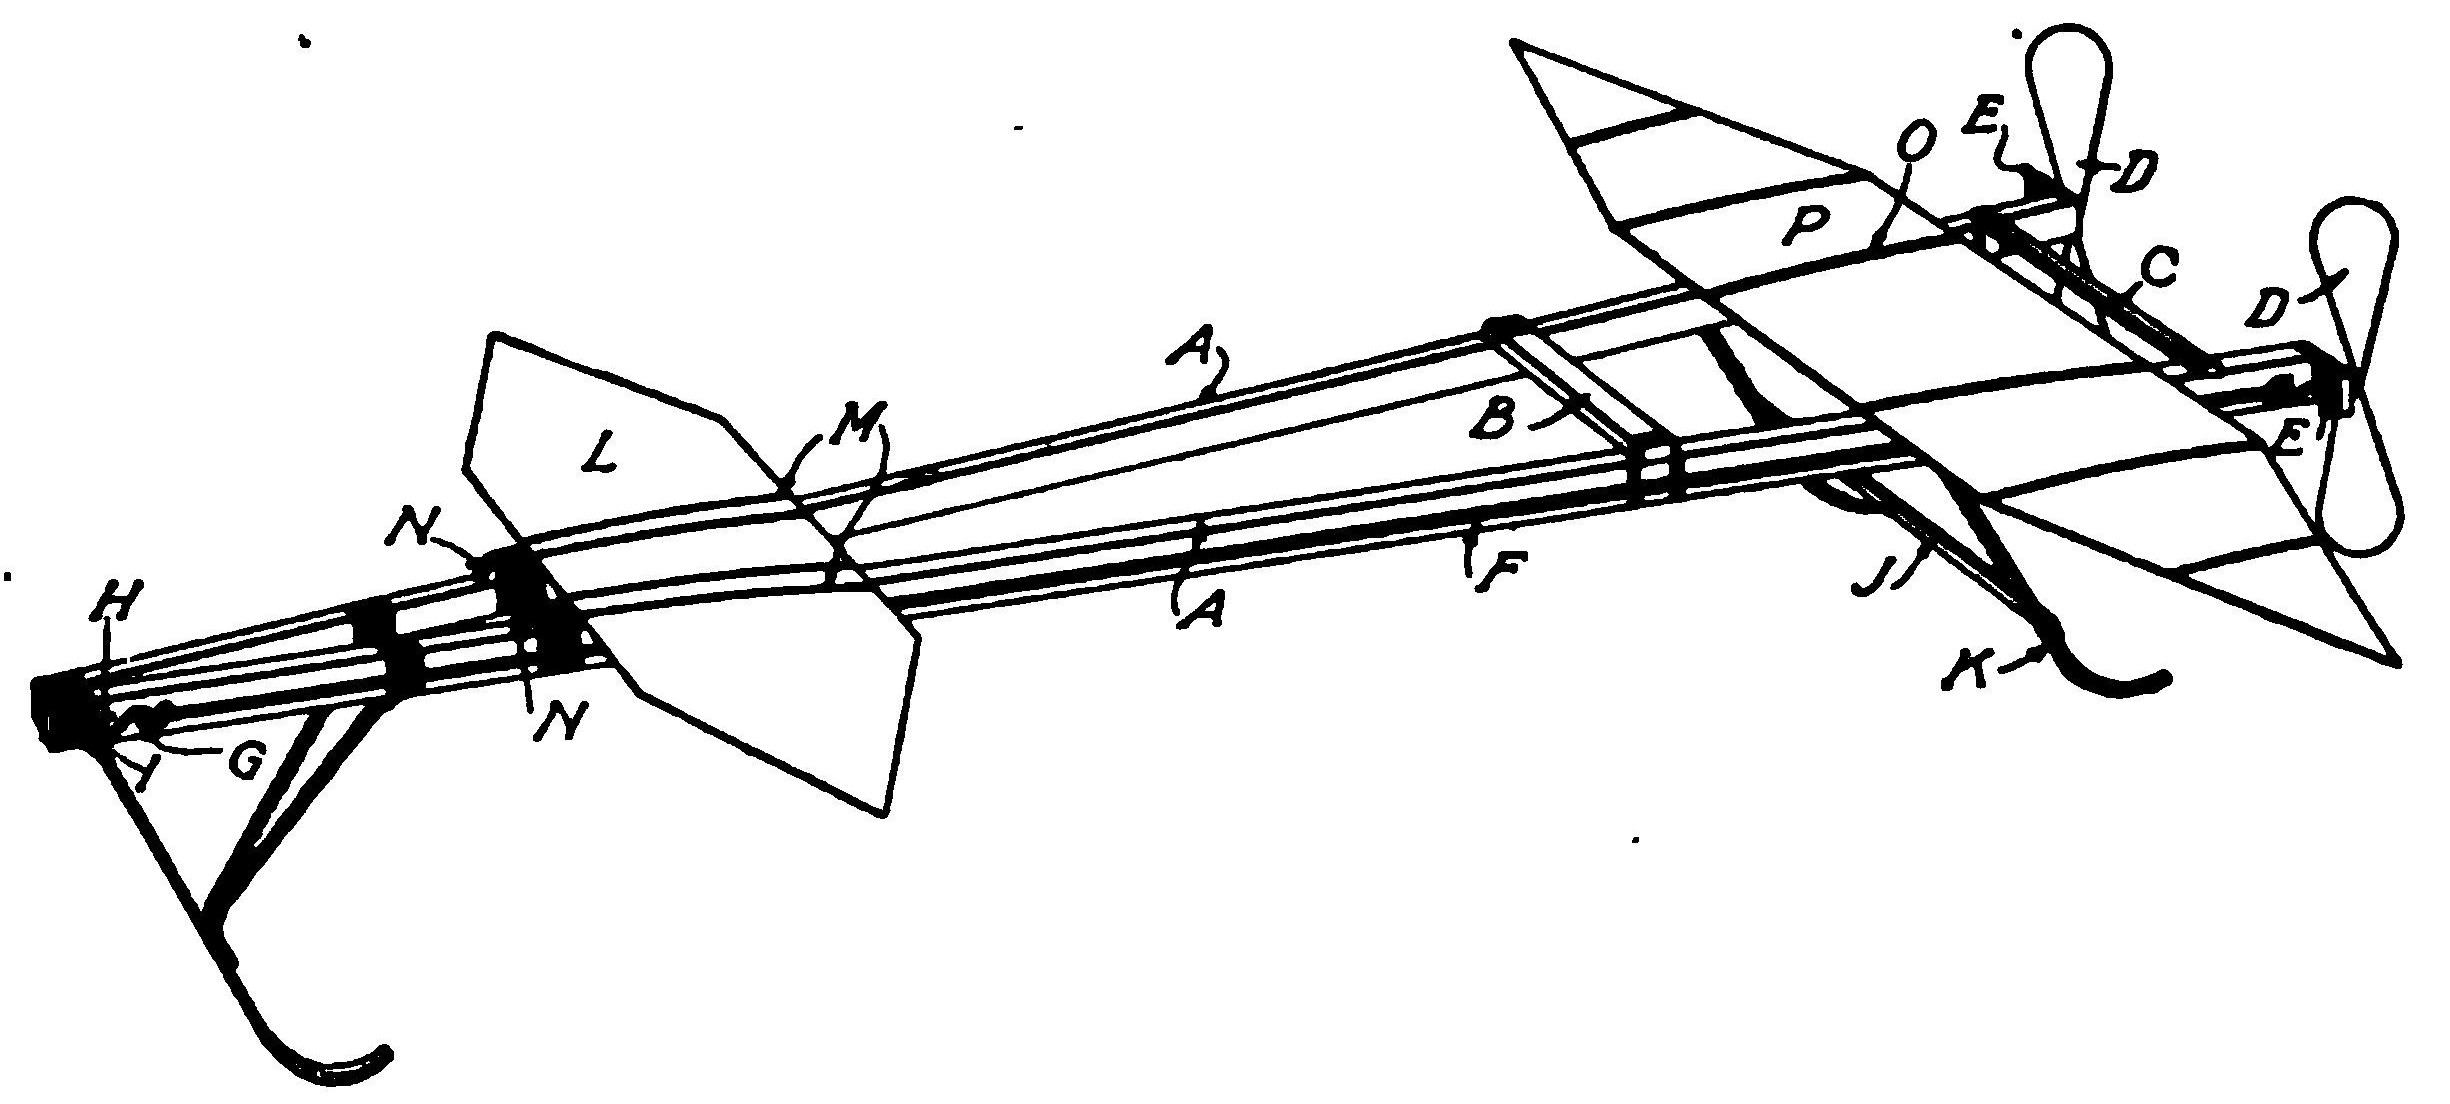 Fig. 1. Details of Main Frame of Rubber-Band Driven Aeroplane Model